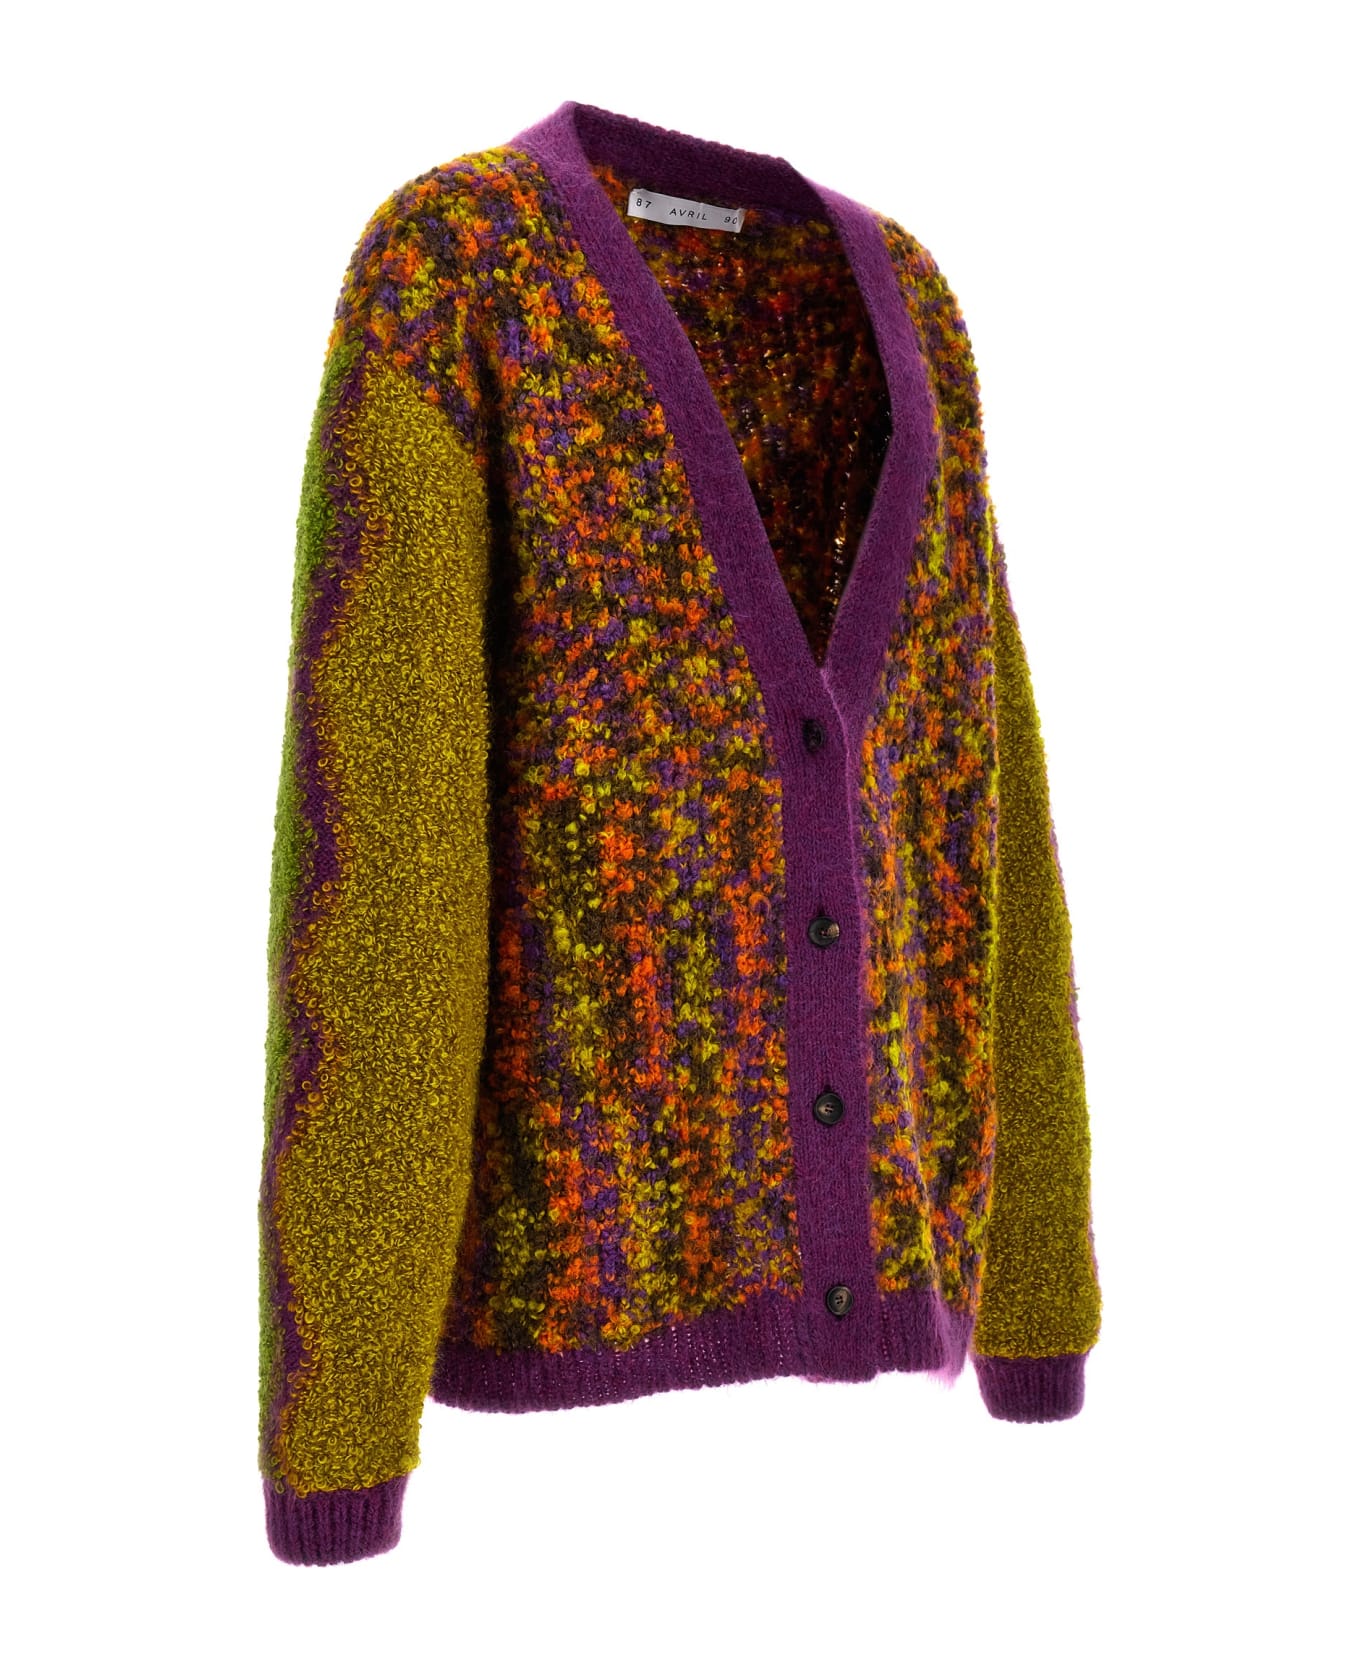 Avril8790 'blooming' Cardigan - Multicolor